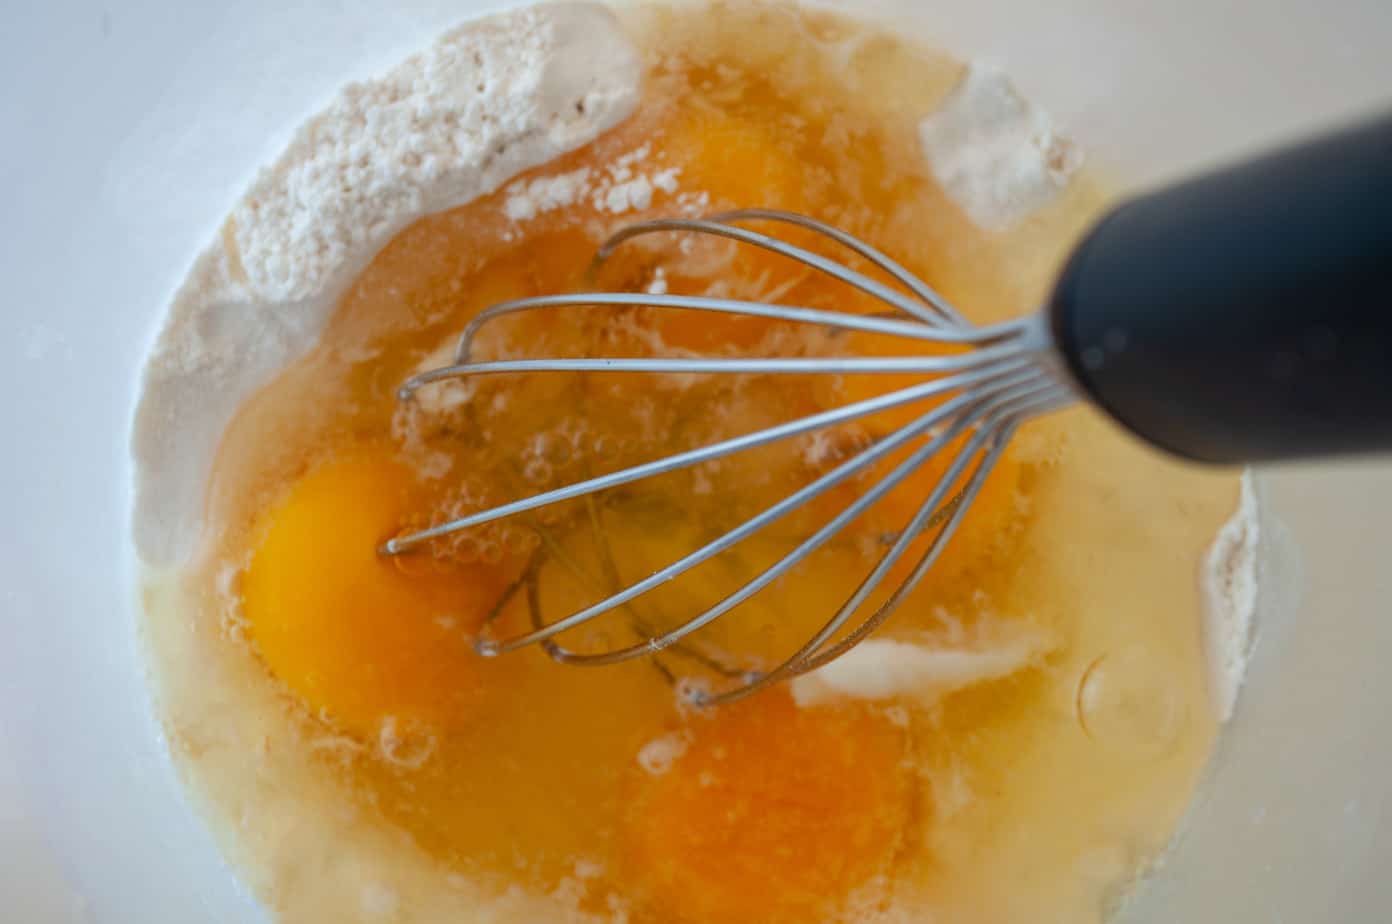 Eggs and flour for yorkshire pudding.